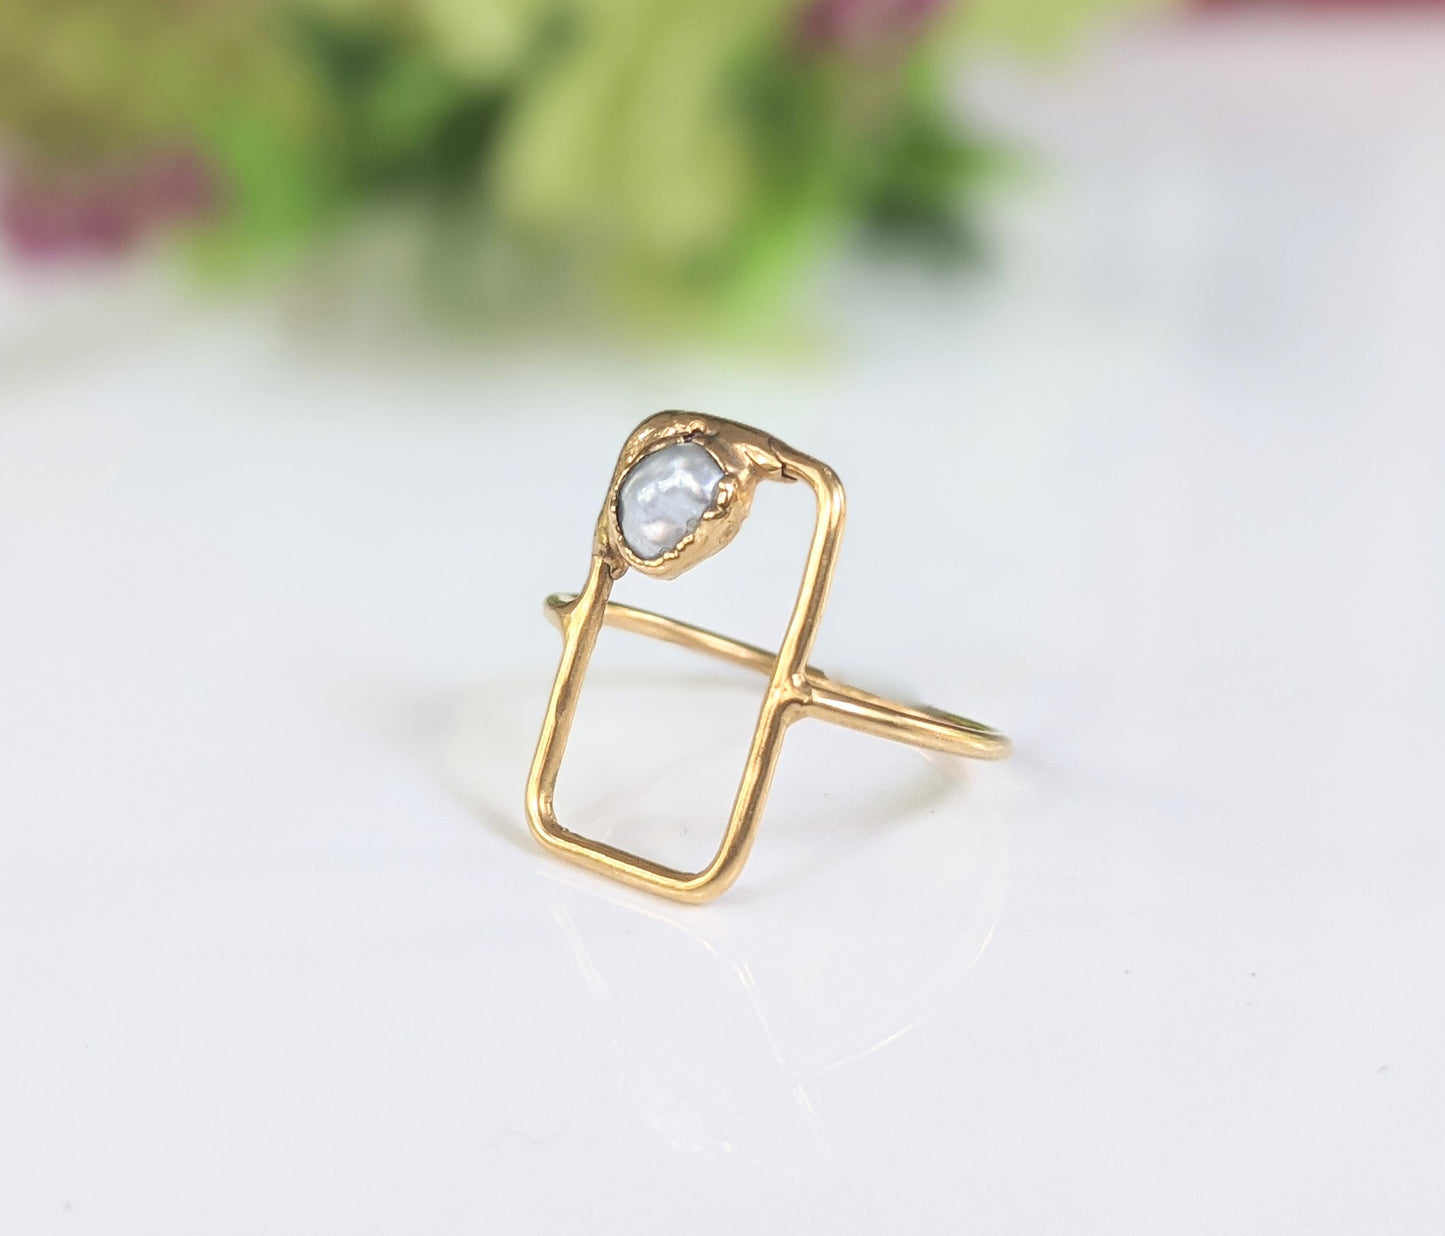 Freshwater pearl ring in unique geometrical 18k Gold setting